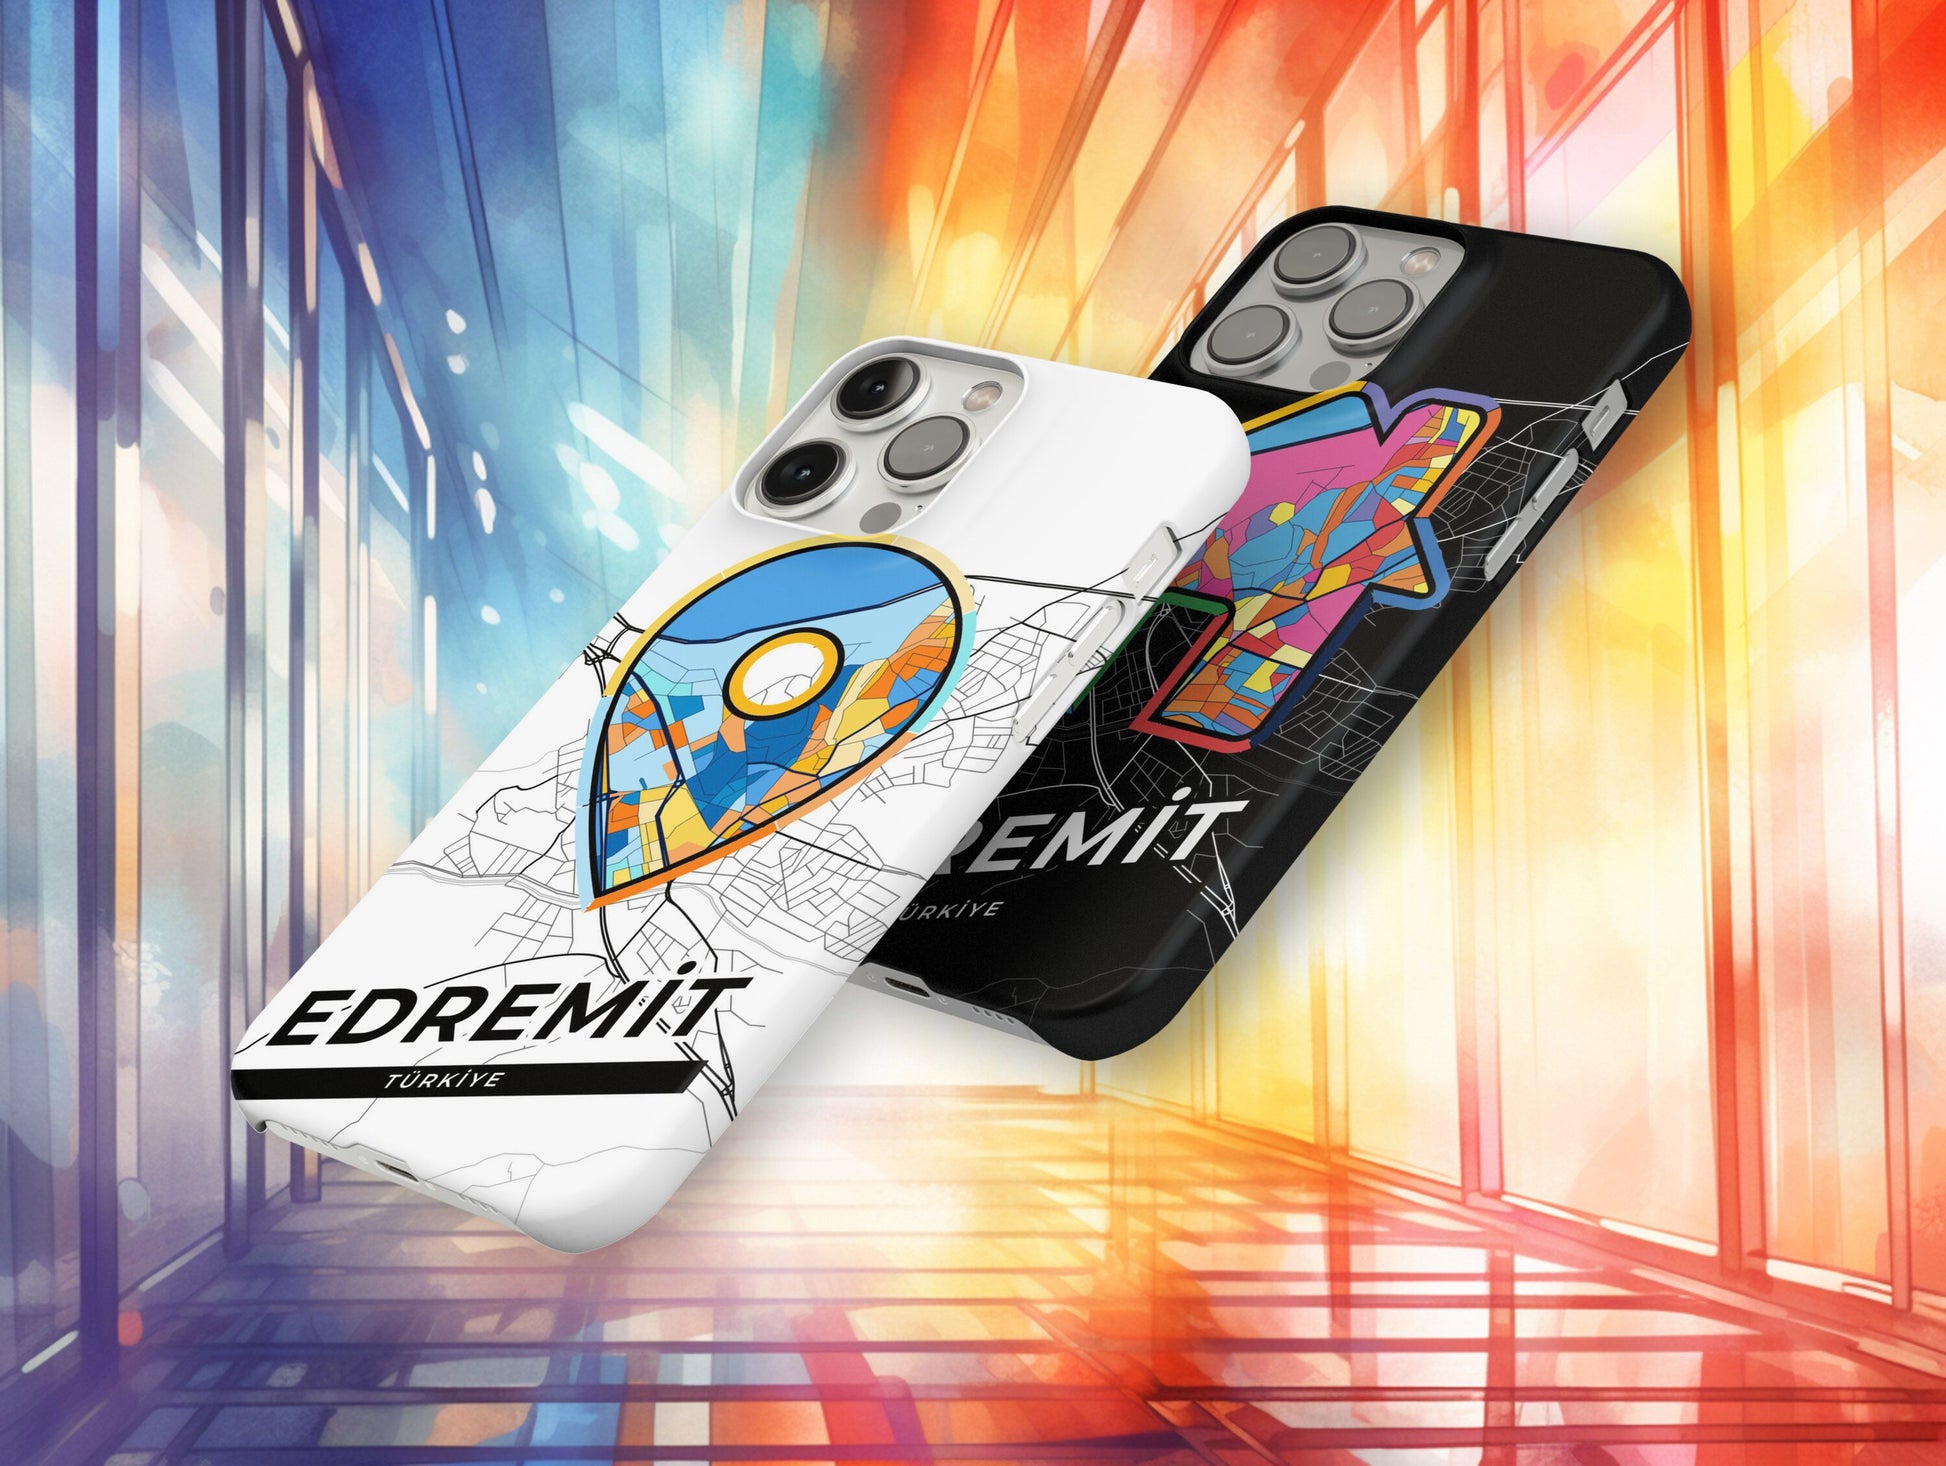 Edremit Turkey slim phone case with colorful icon. Birthday, wedding or housewarming gift. Couple match cases.